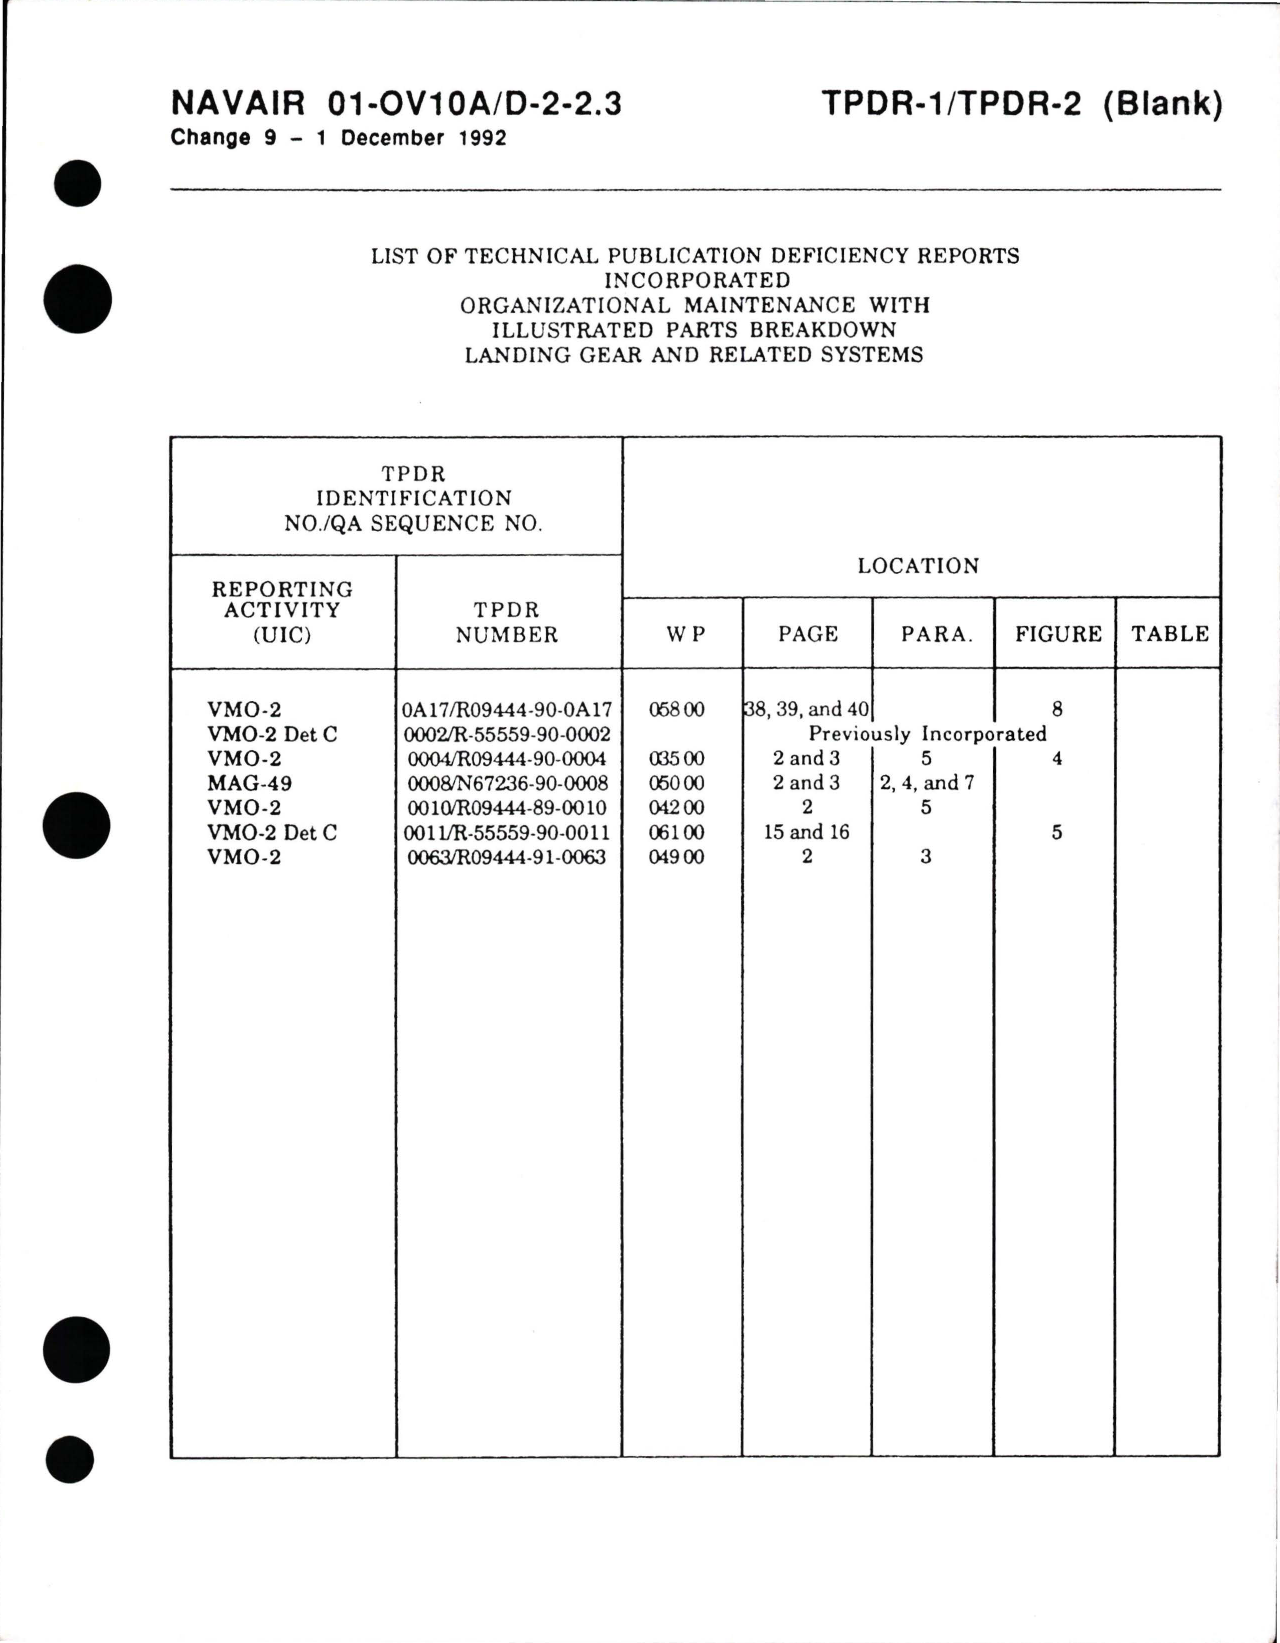 Sample page 7 from AirCorps Library document: Organizational Maintenance with Illustrated Parts Breakdown for Landing Gear and Related Systems for OV-10A/D 